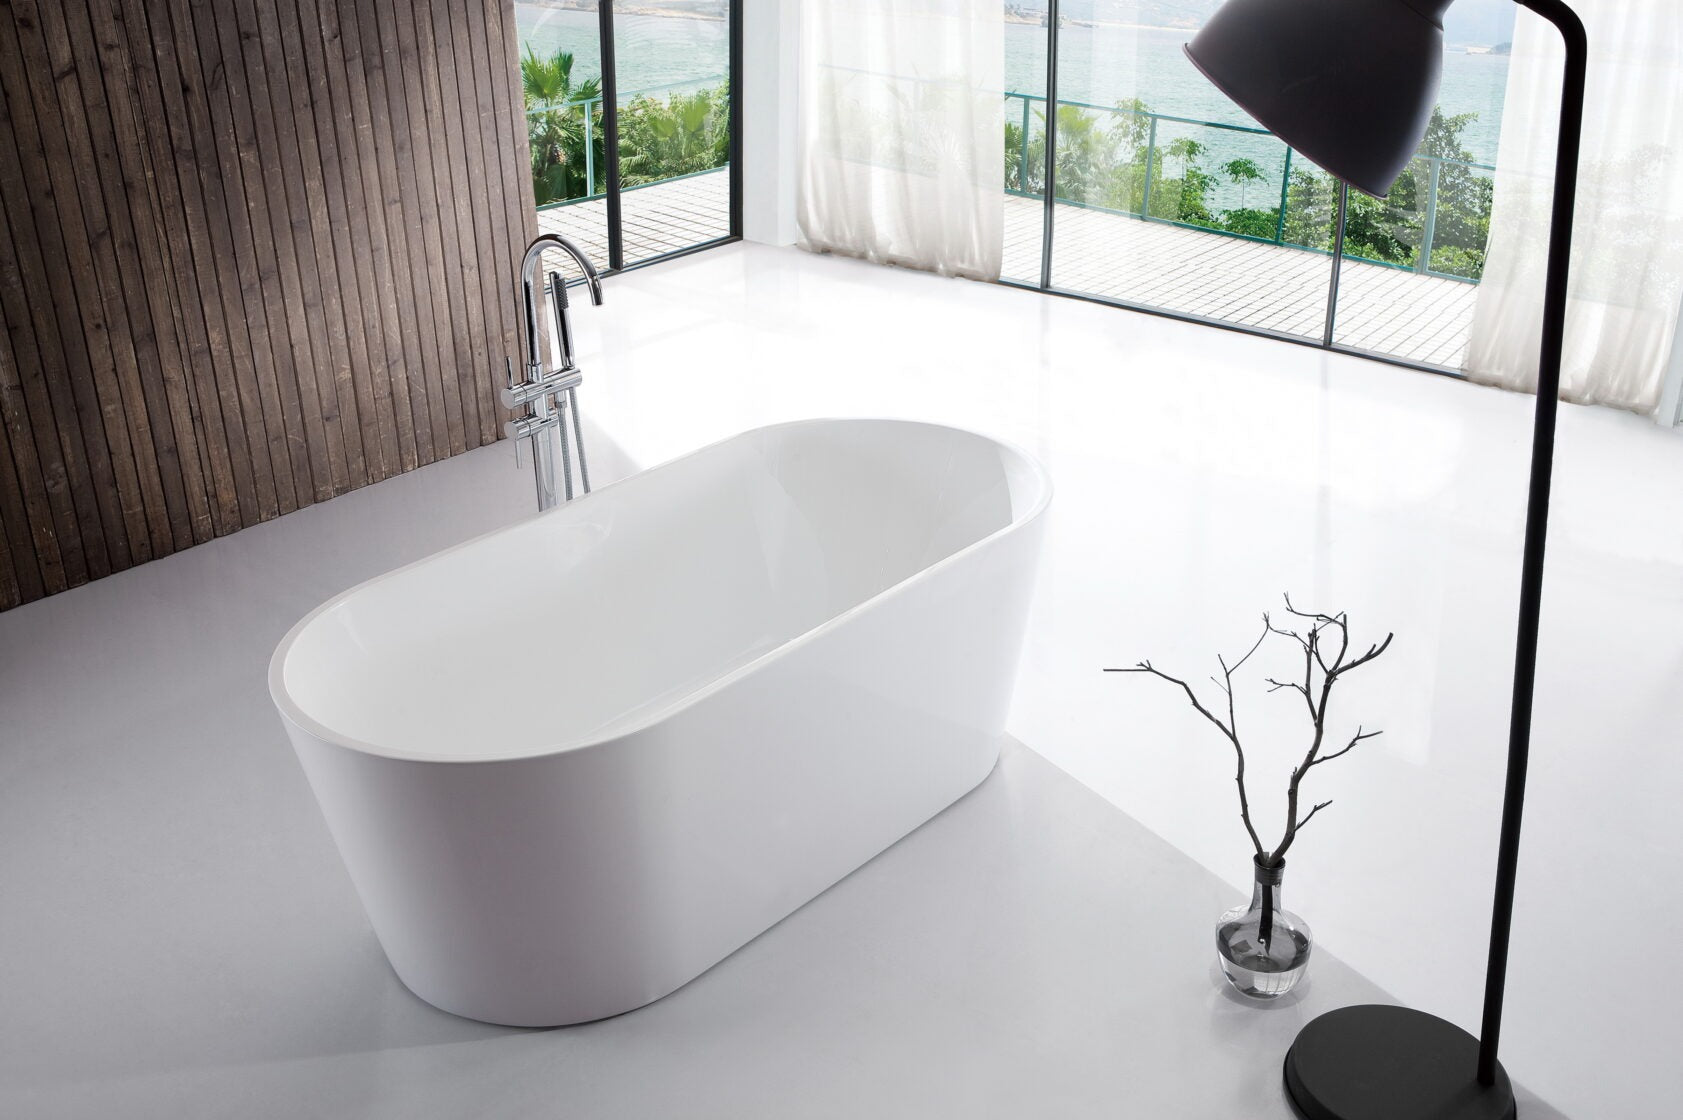 RIVA SHANTY FREESTANDING BATHTUB GLOSS WHITE (AVAILABLE IN 1200MM, 1300MM, 1400MM, 1500MM, 1600MM AND 1700MM)